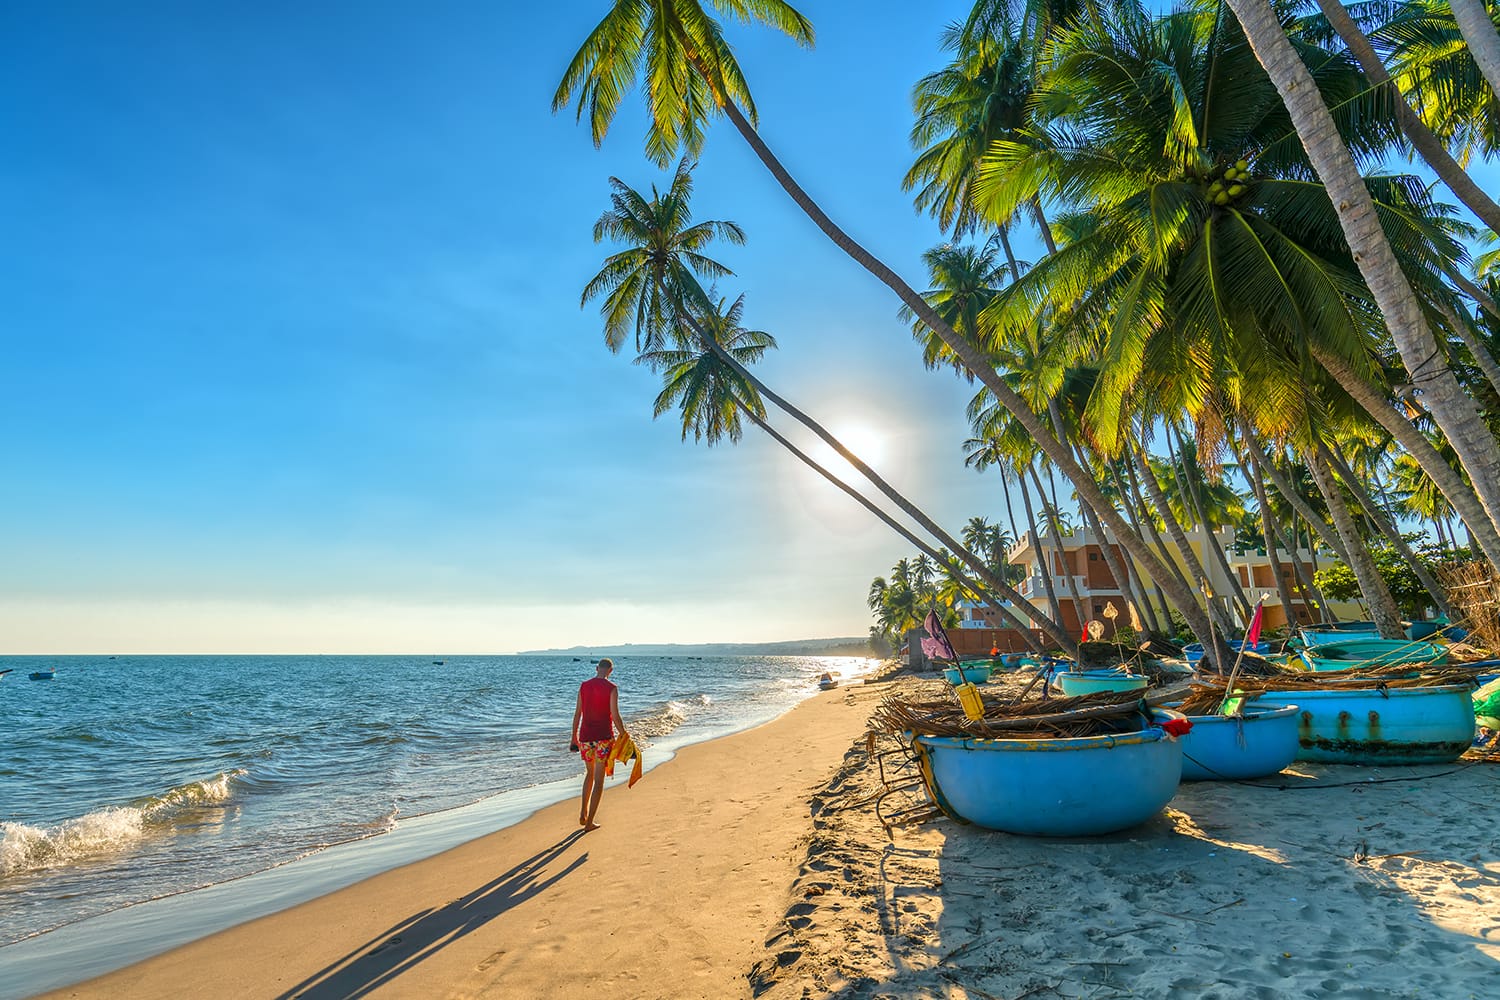 The man alone go to end of tropical beach with coconut palm trees as sun gradually create beautiful setting for weekend guests at paradise beach in Mui Ne, Vietnam